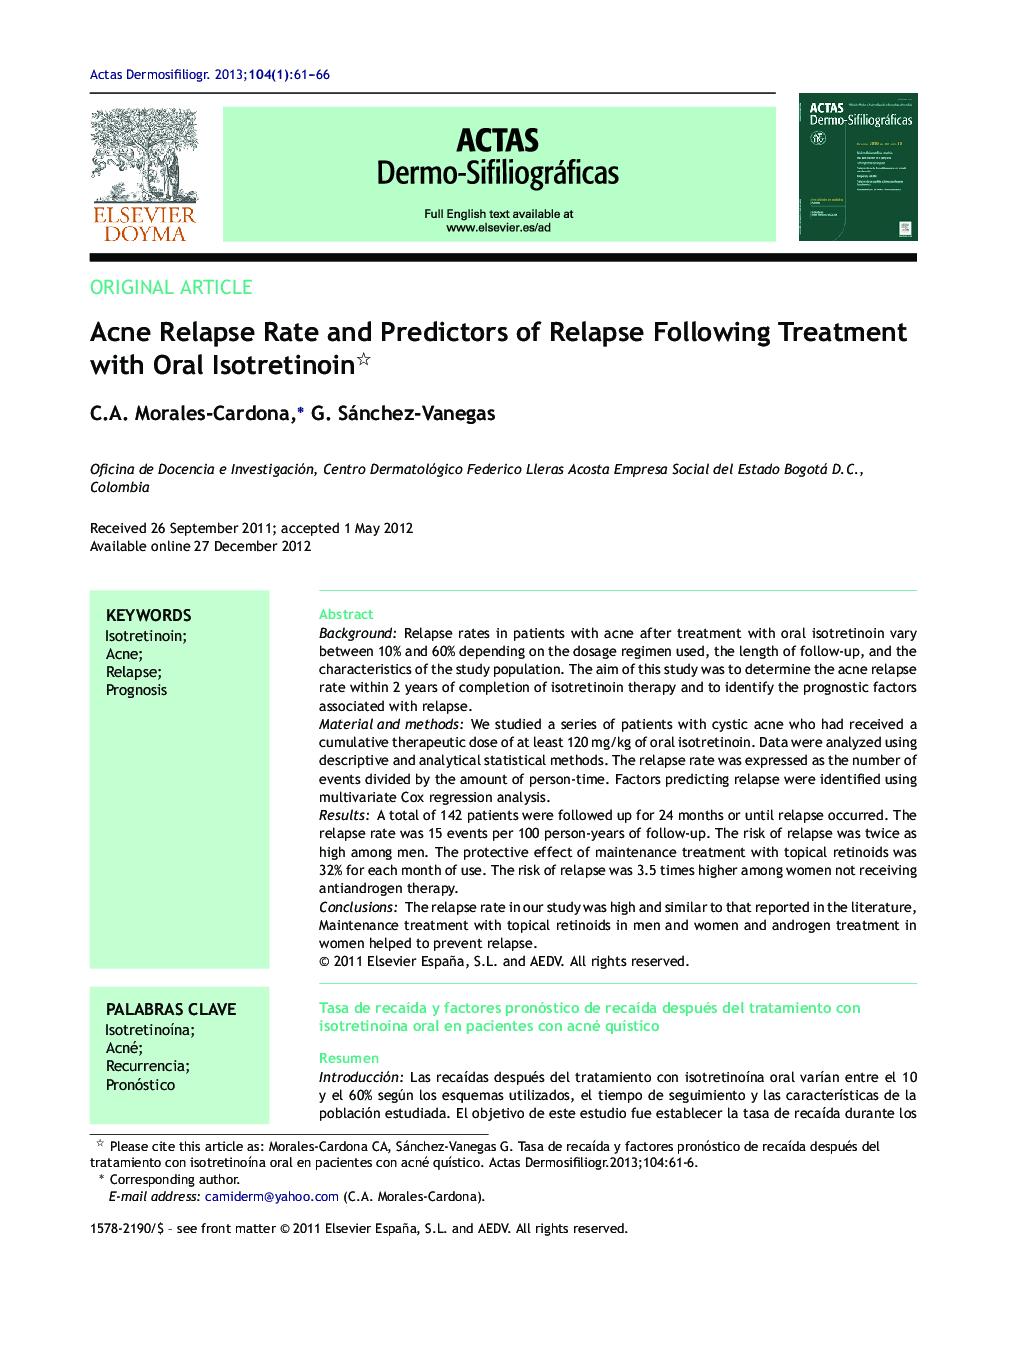 Acne Relapse Rate and Predictors of Relapse Following Treatment with Oral Isotretinoin 